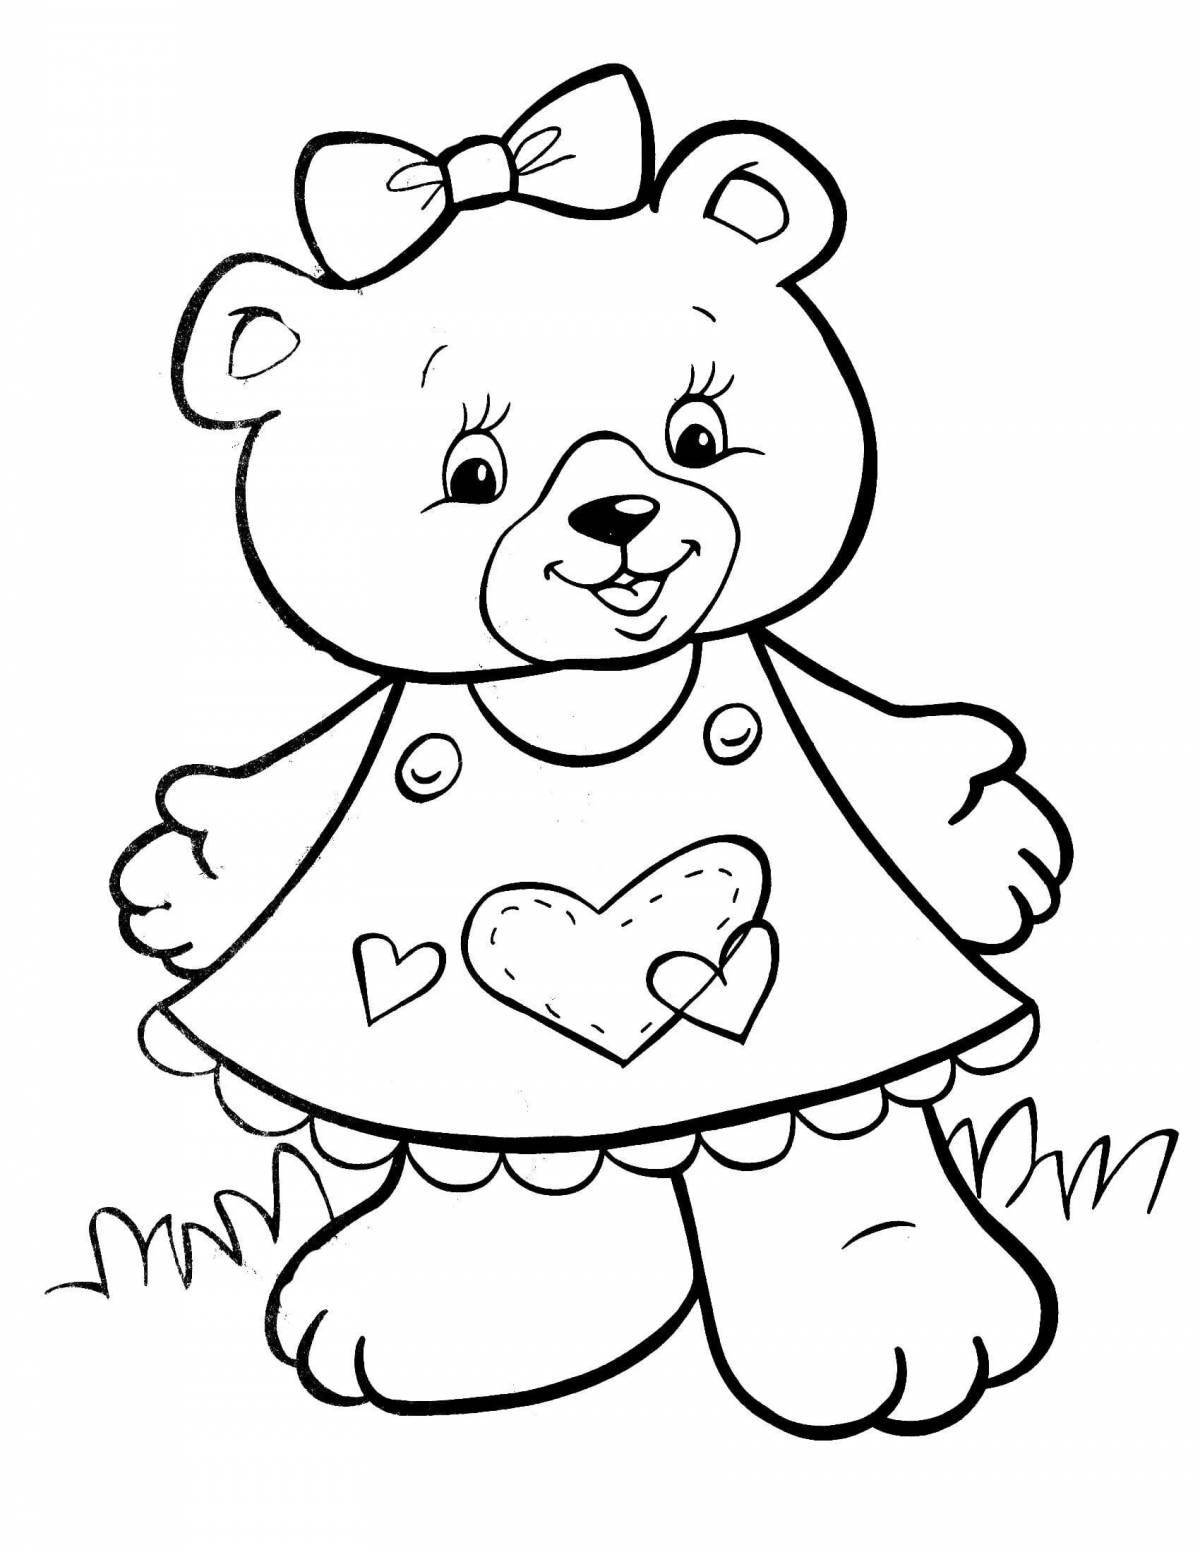 Tiny bear coloring page